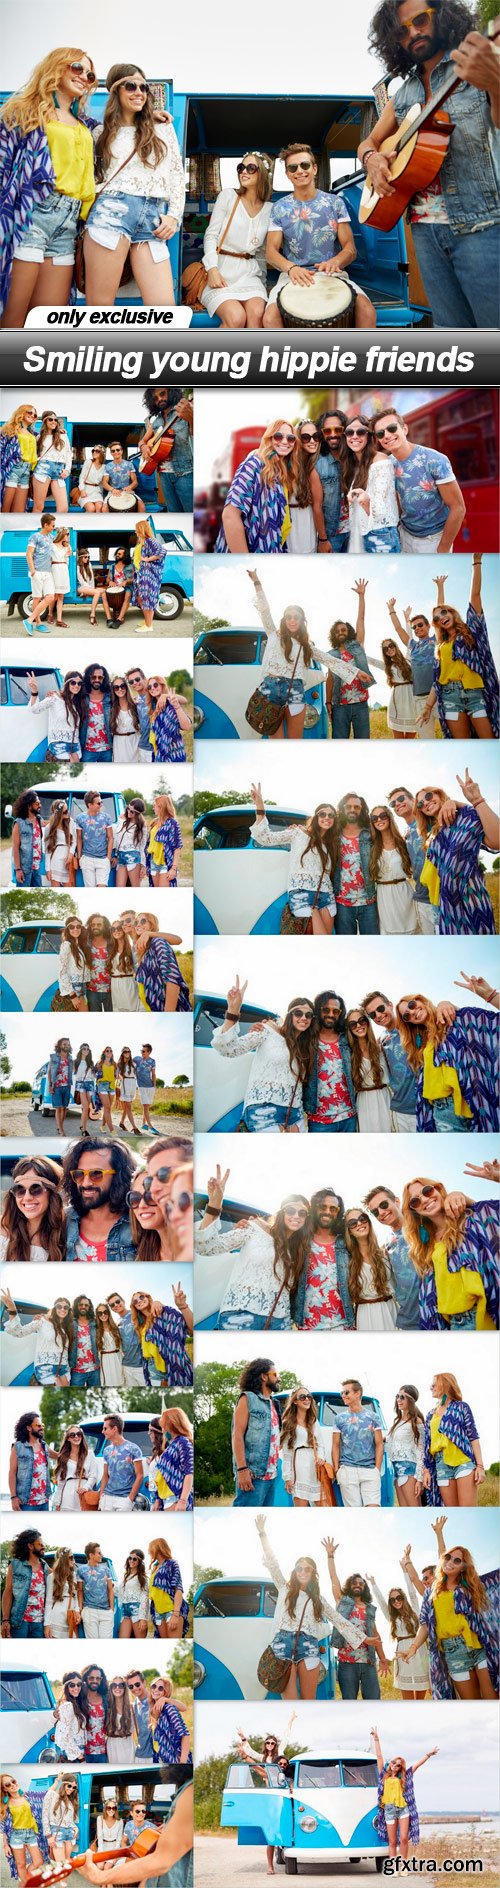 Smiling young hippie friends - 20 UHQ JPEG